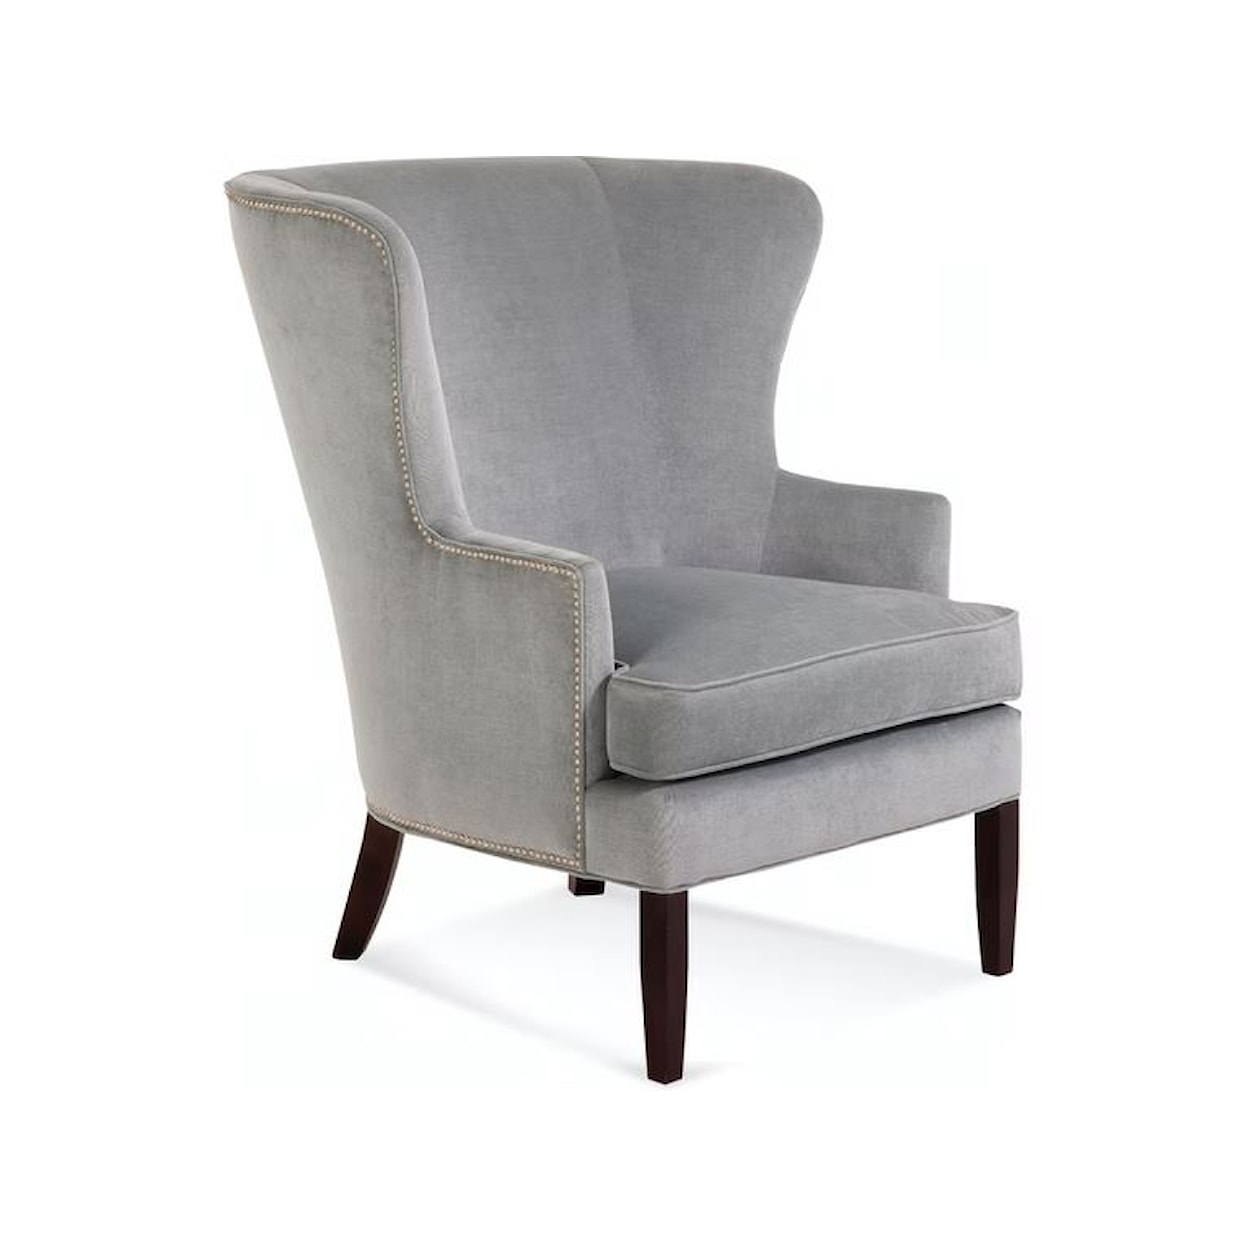 Braxton Culler Accent Chairs Tredwell Wing Chair with Nailheads